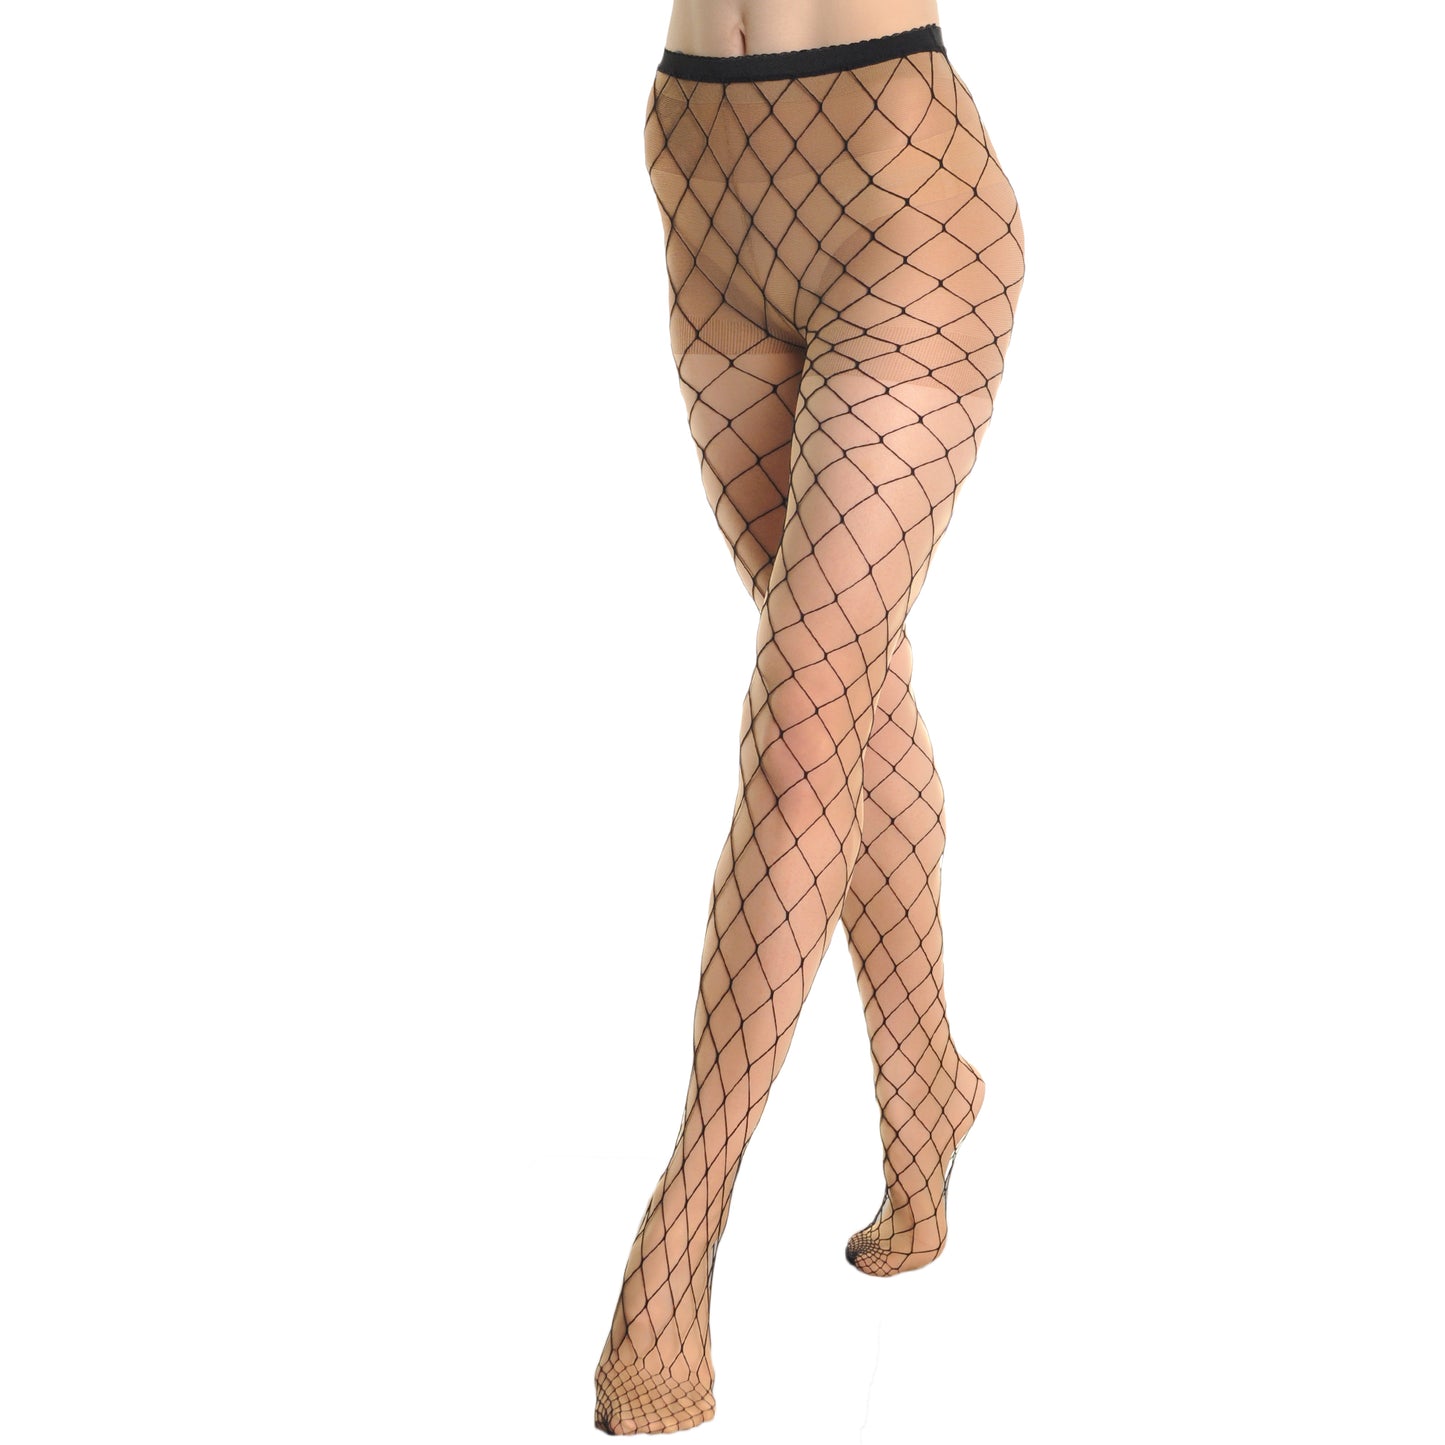 Industrial Net Pantyhose with Spandex (1-Pack)